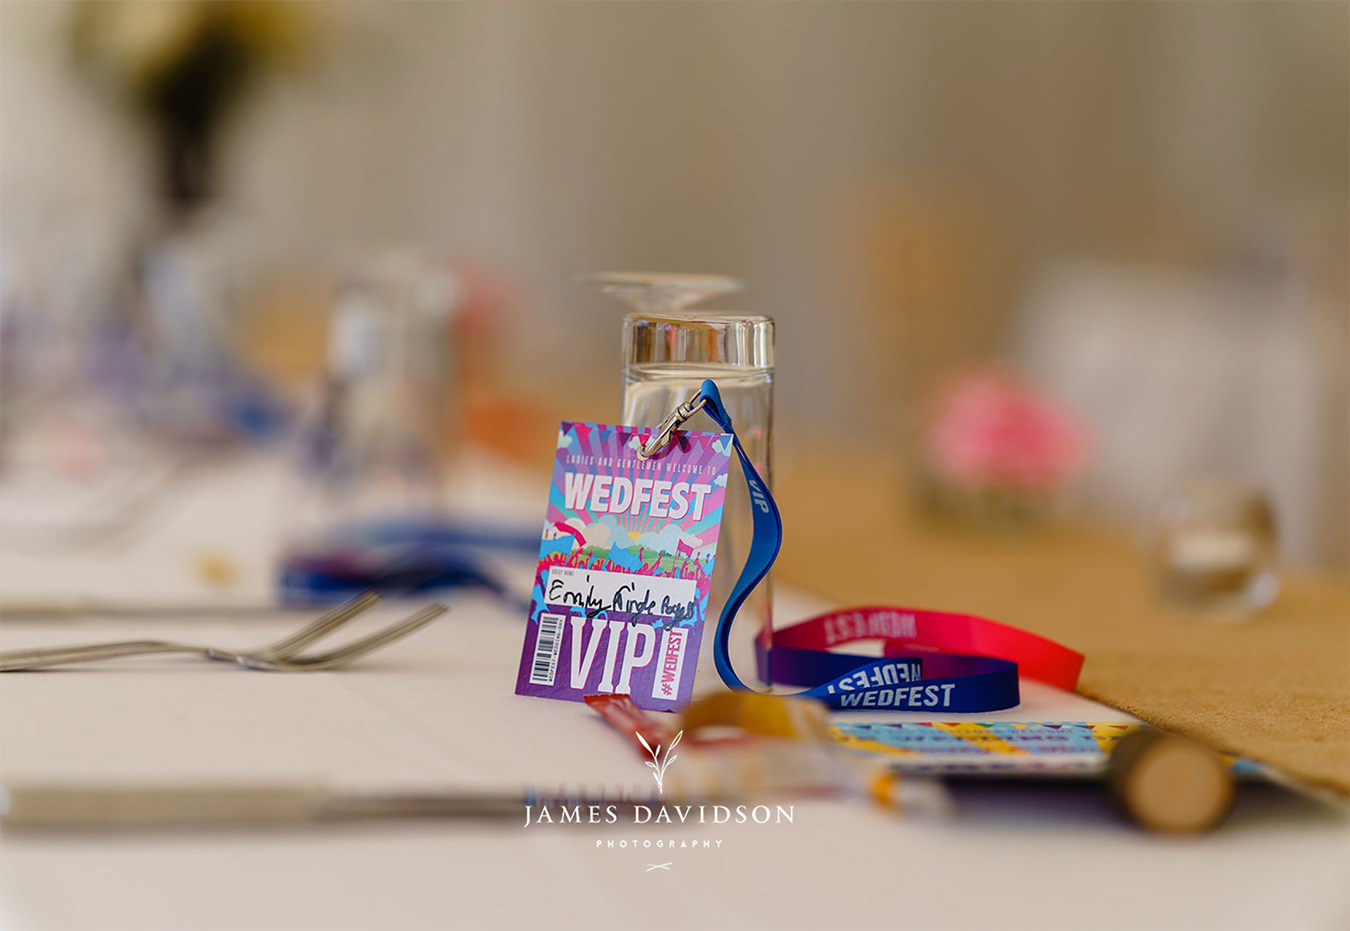 wedfest festival wedding vip lanyard table place name card